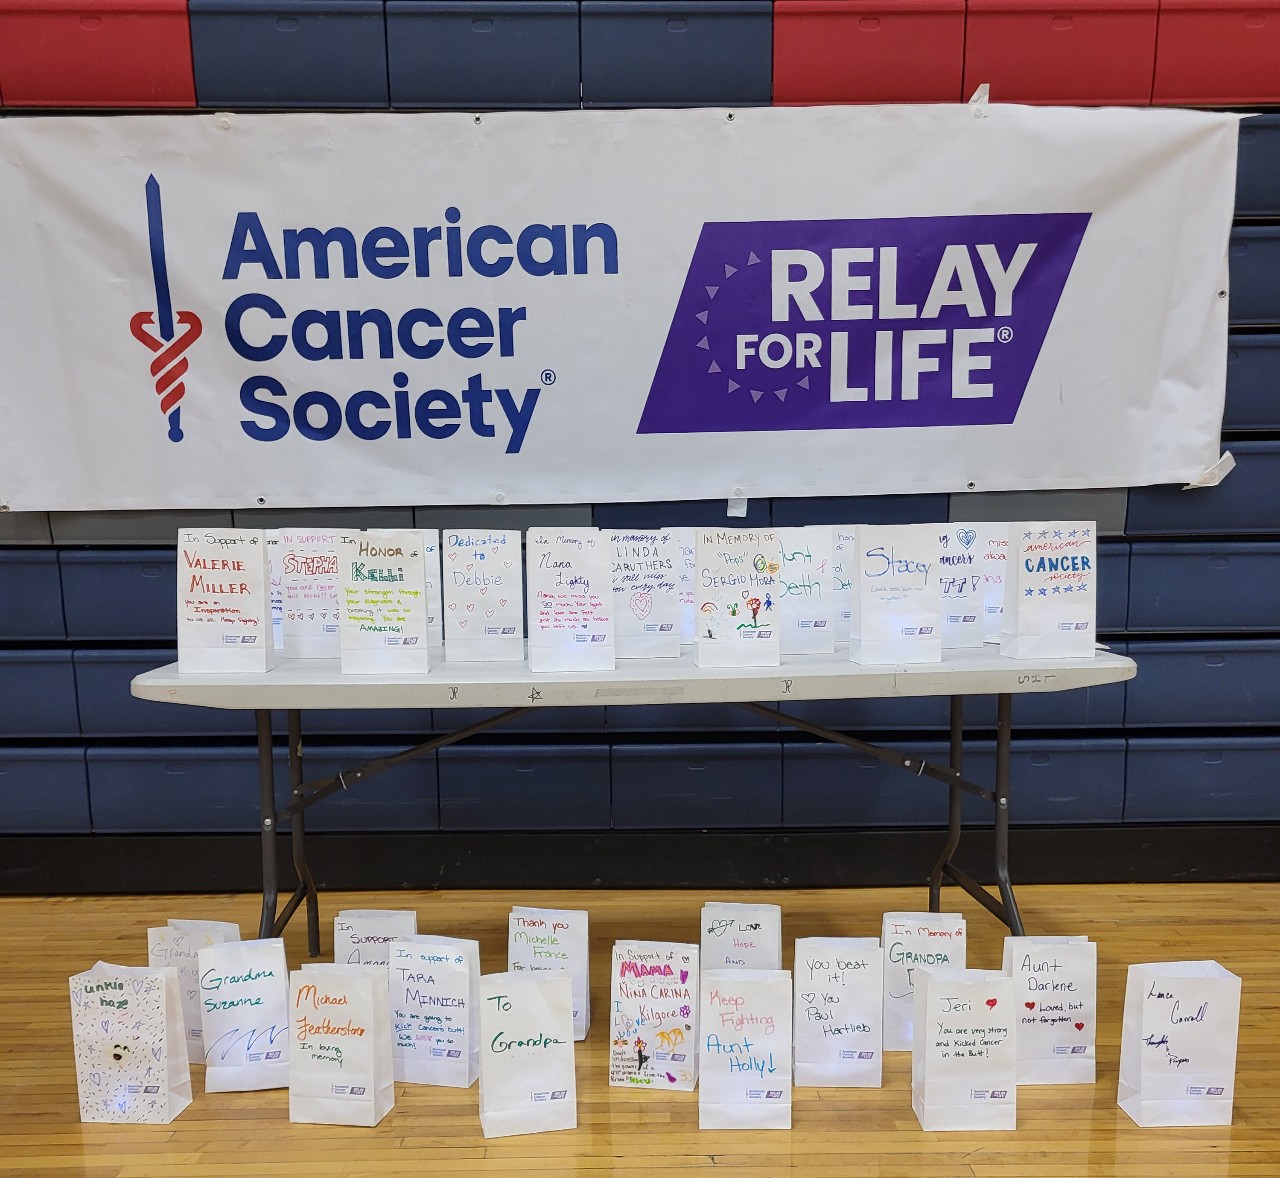 Luminaria bags sit on and in front of a table with an American Cancer Society Relay for Life banner.